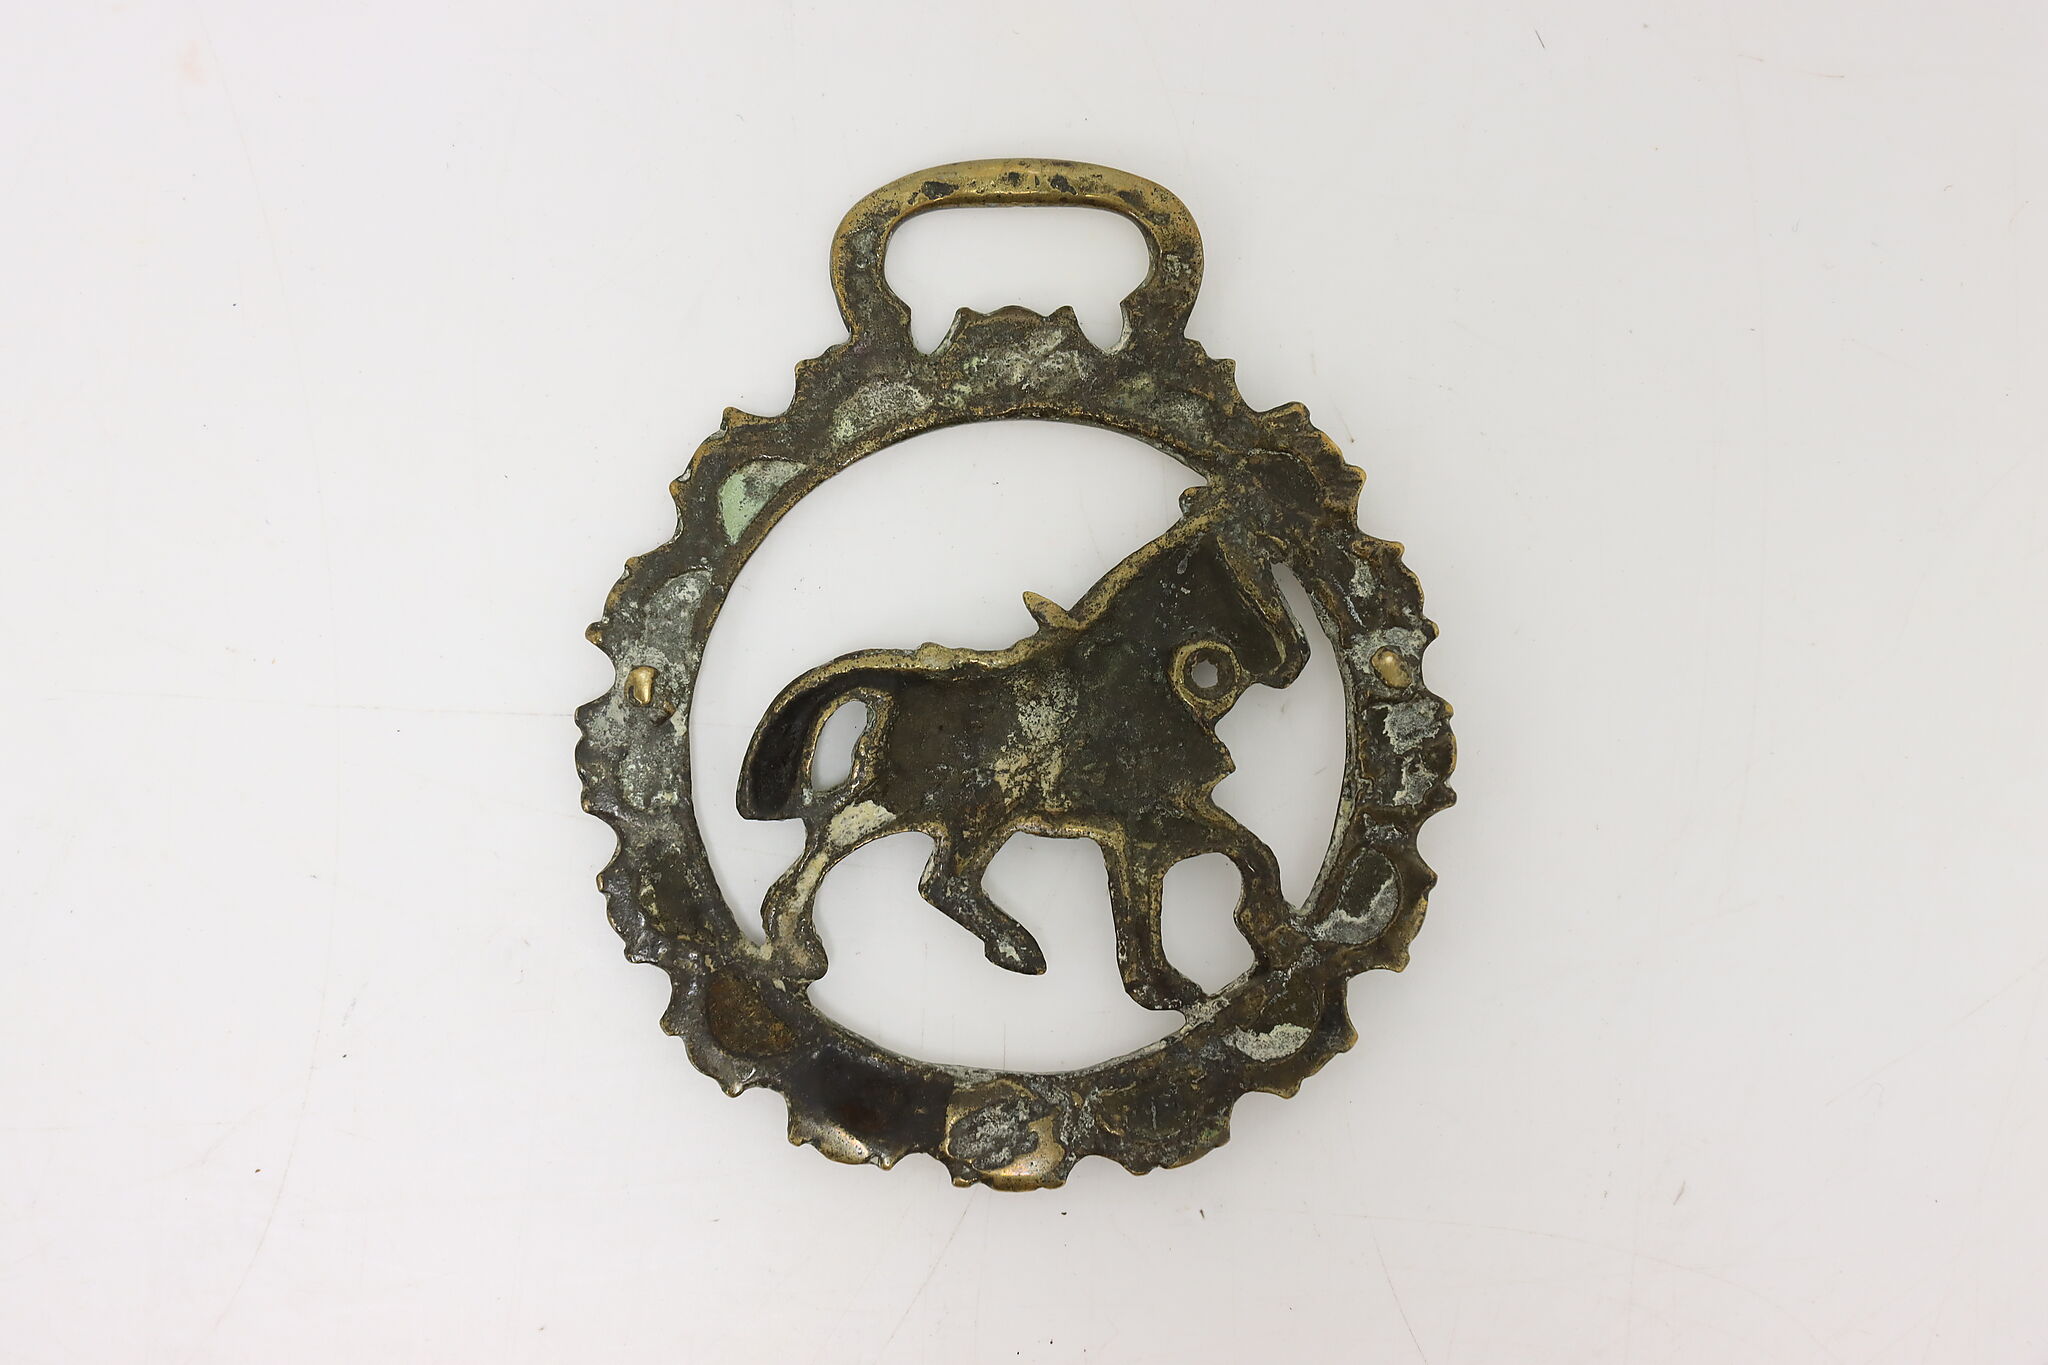 Ancient and Rare Medallion of Harness or Bridle for Horse Decoration of  Gemini Astrological Sign in Brass Marked GEMINI -  Canada